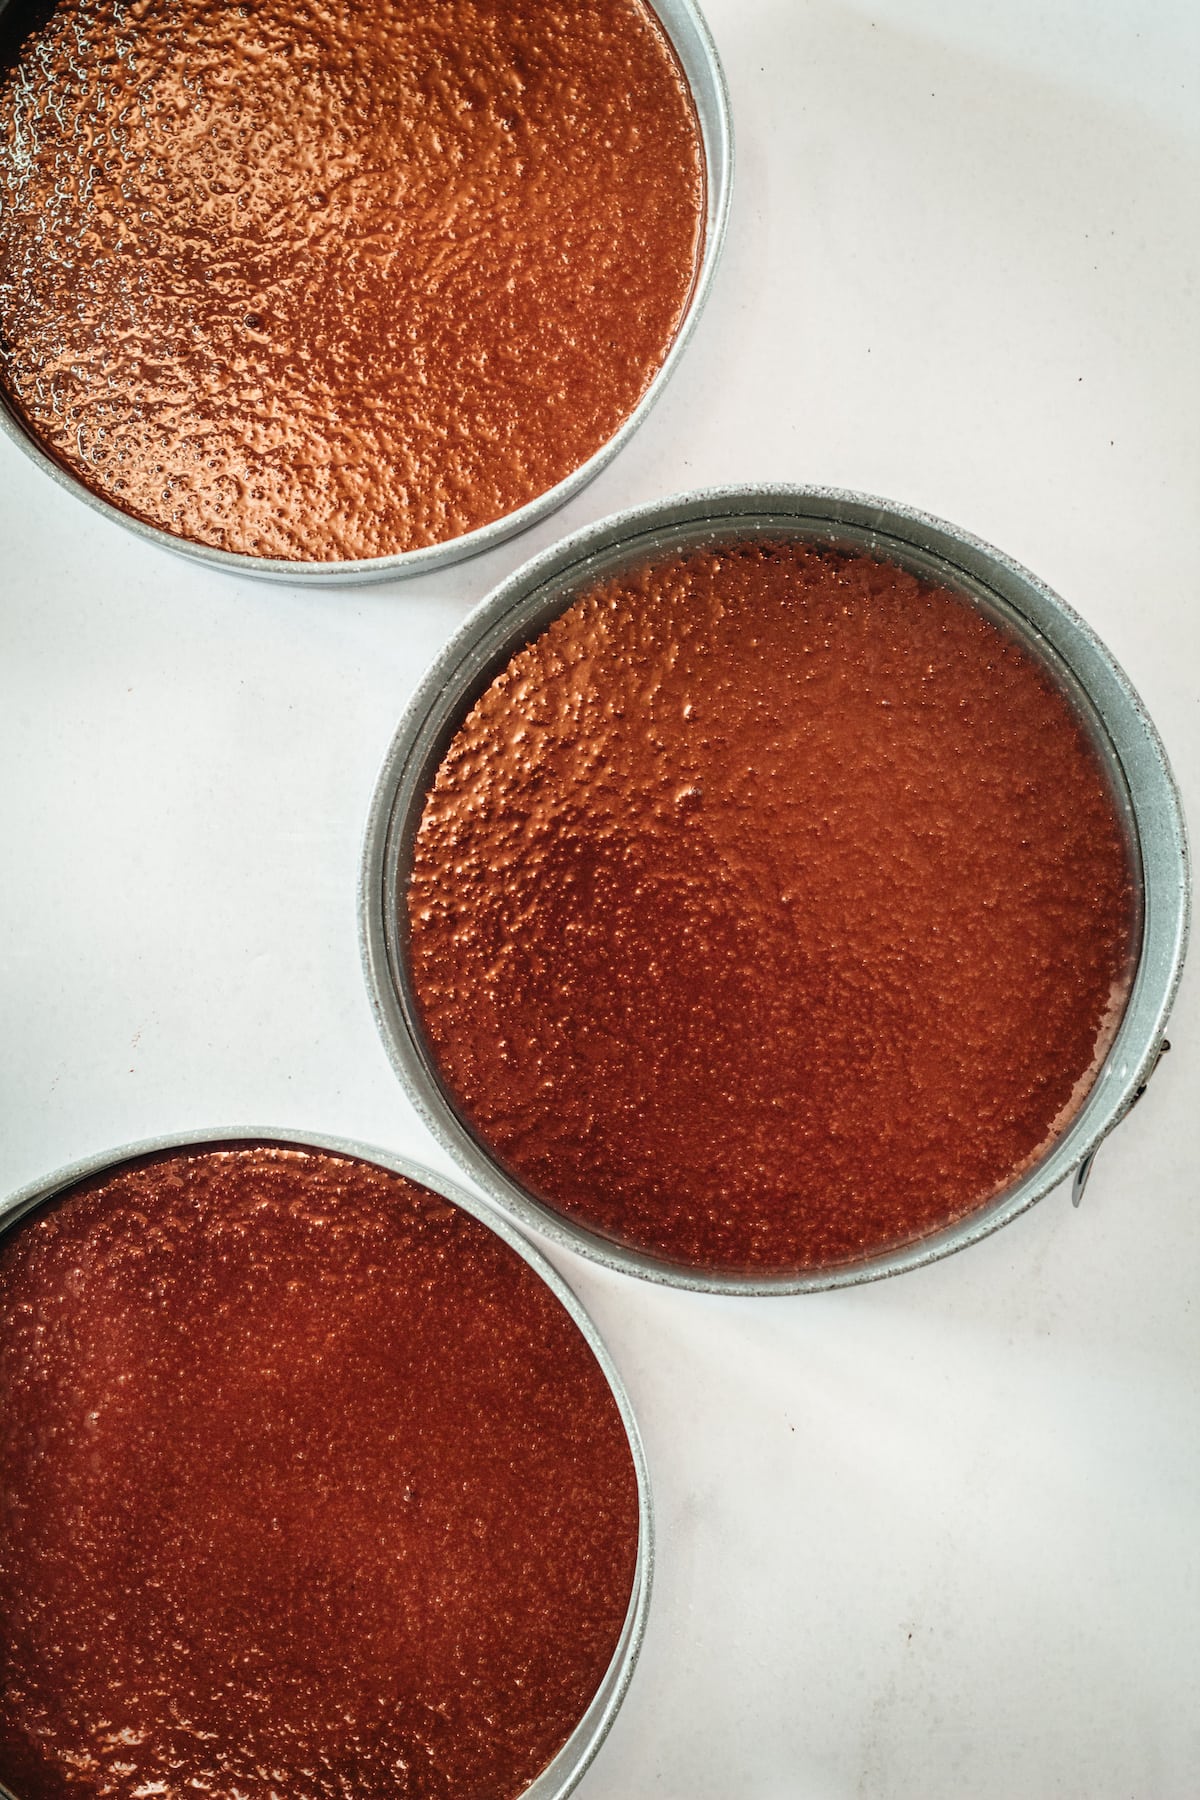 Overhead view of 3 round cake pans with chocolate cake inside